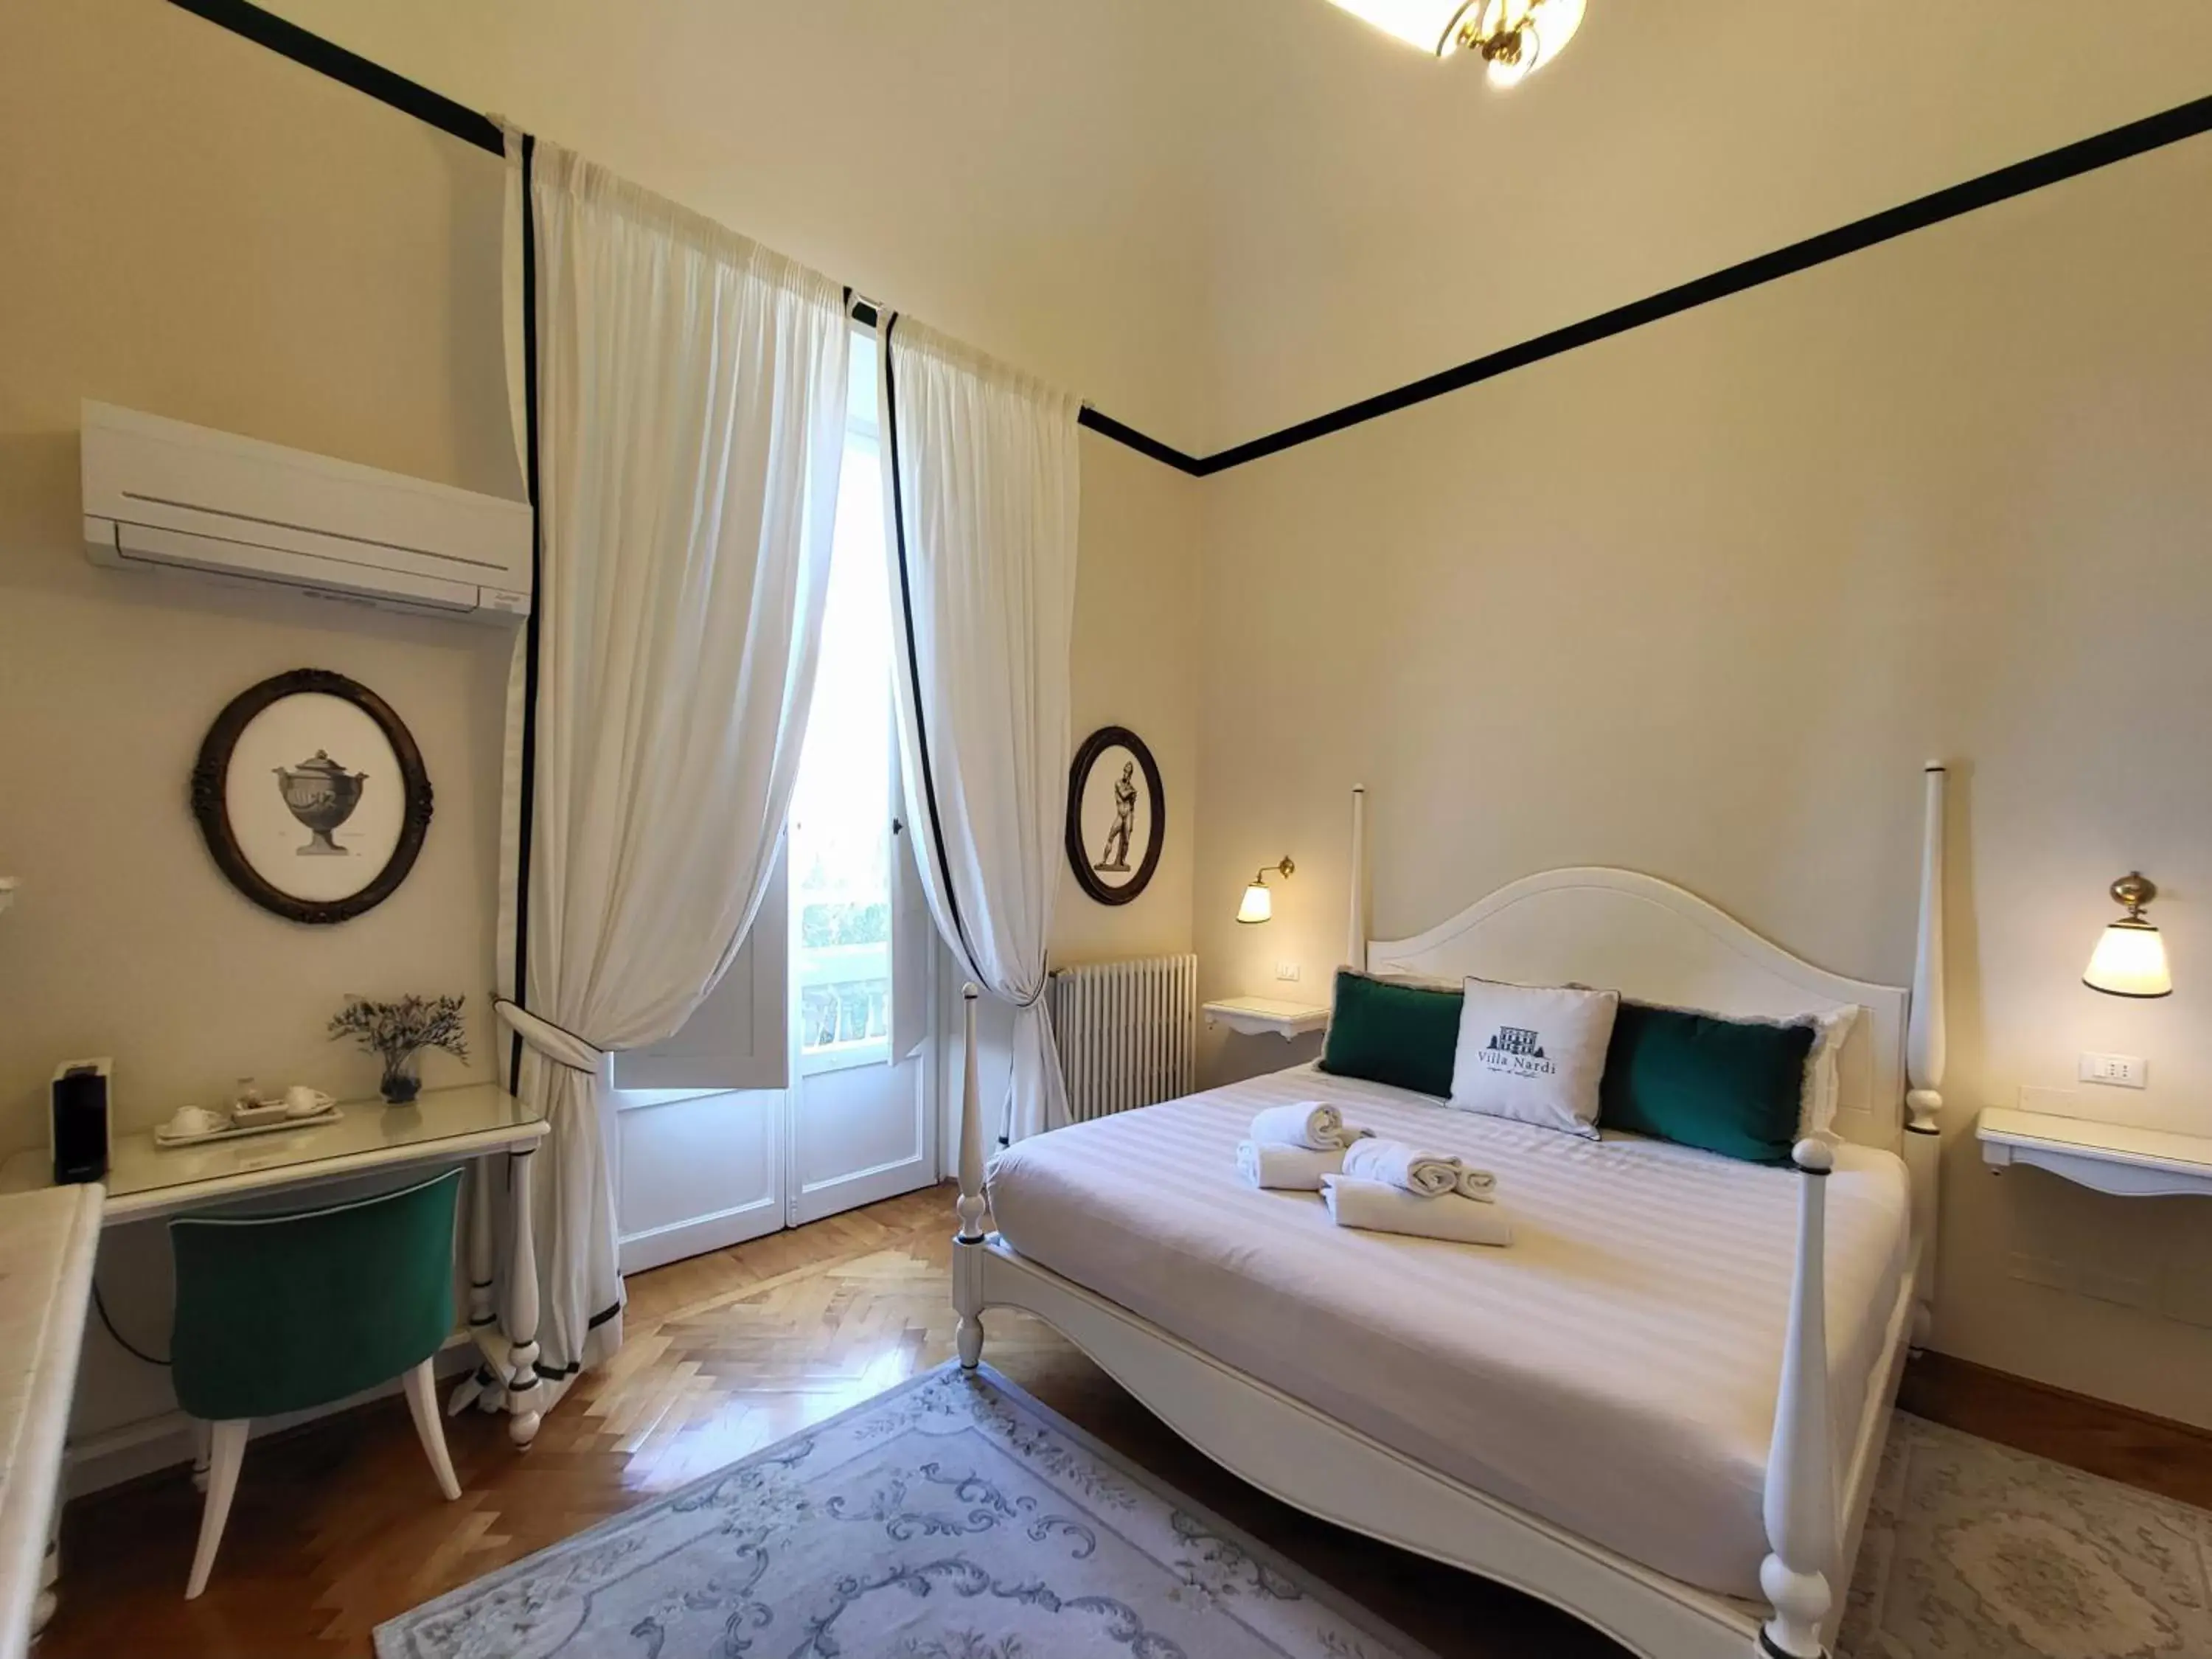 View (from property/room), Bed in Villa Nardi - Residenza D'Epoca